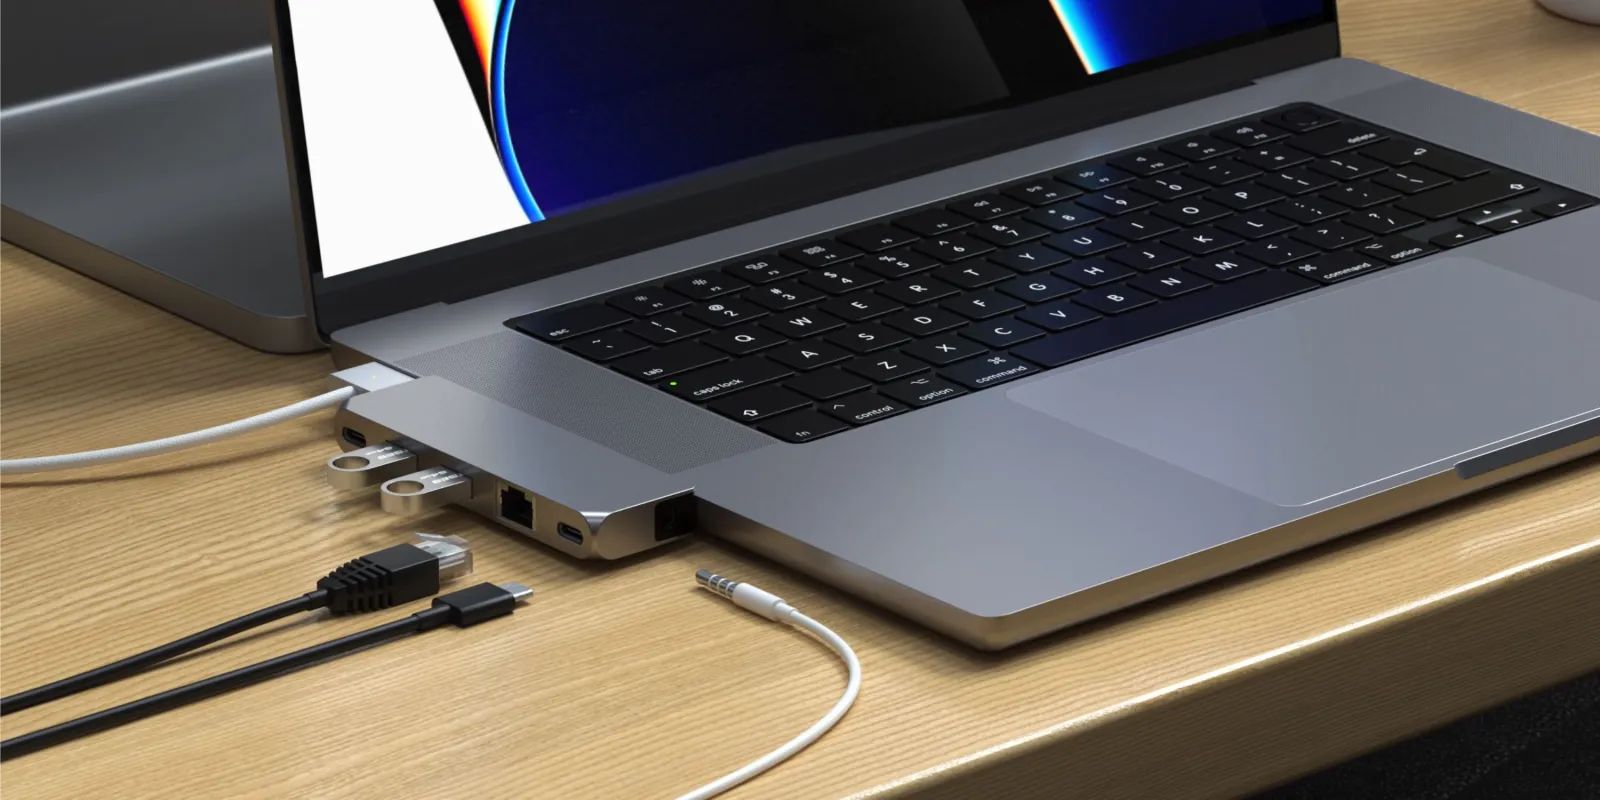 11 Amazing Ethernet Adapter For Macbook Pro for 2023